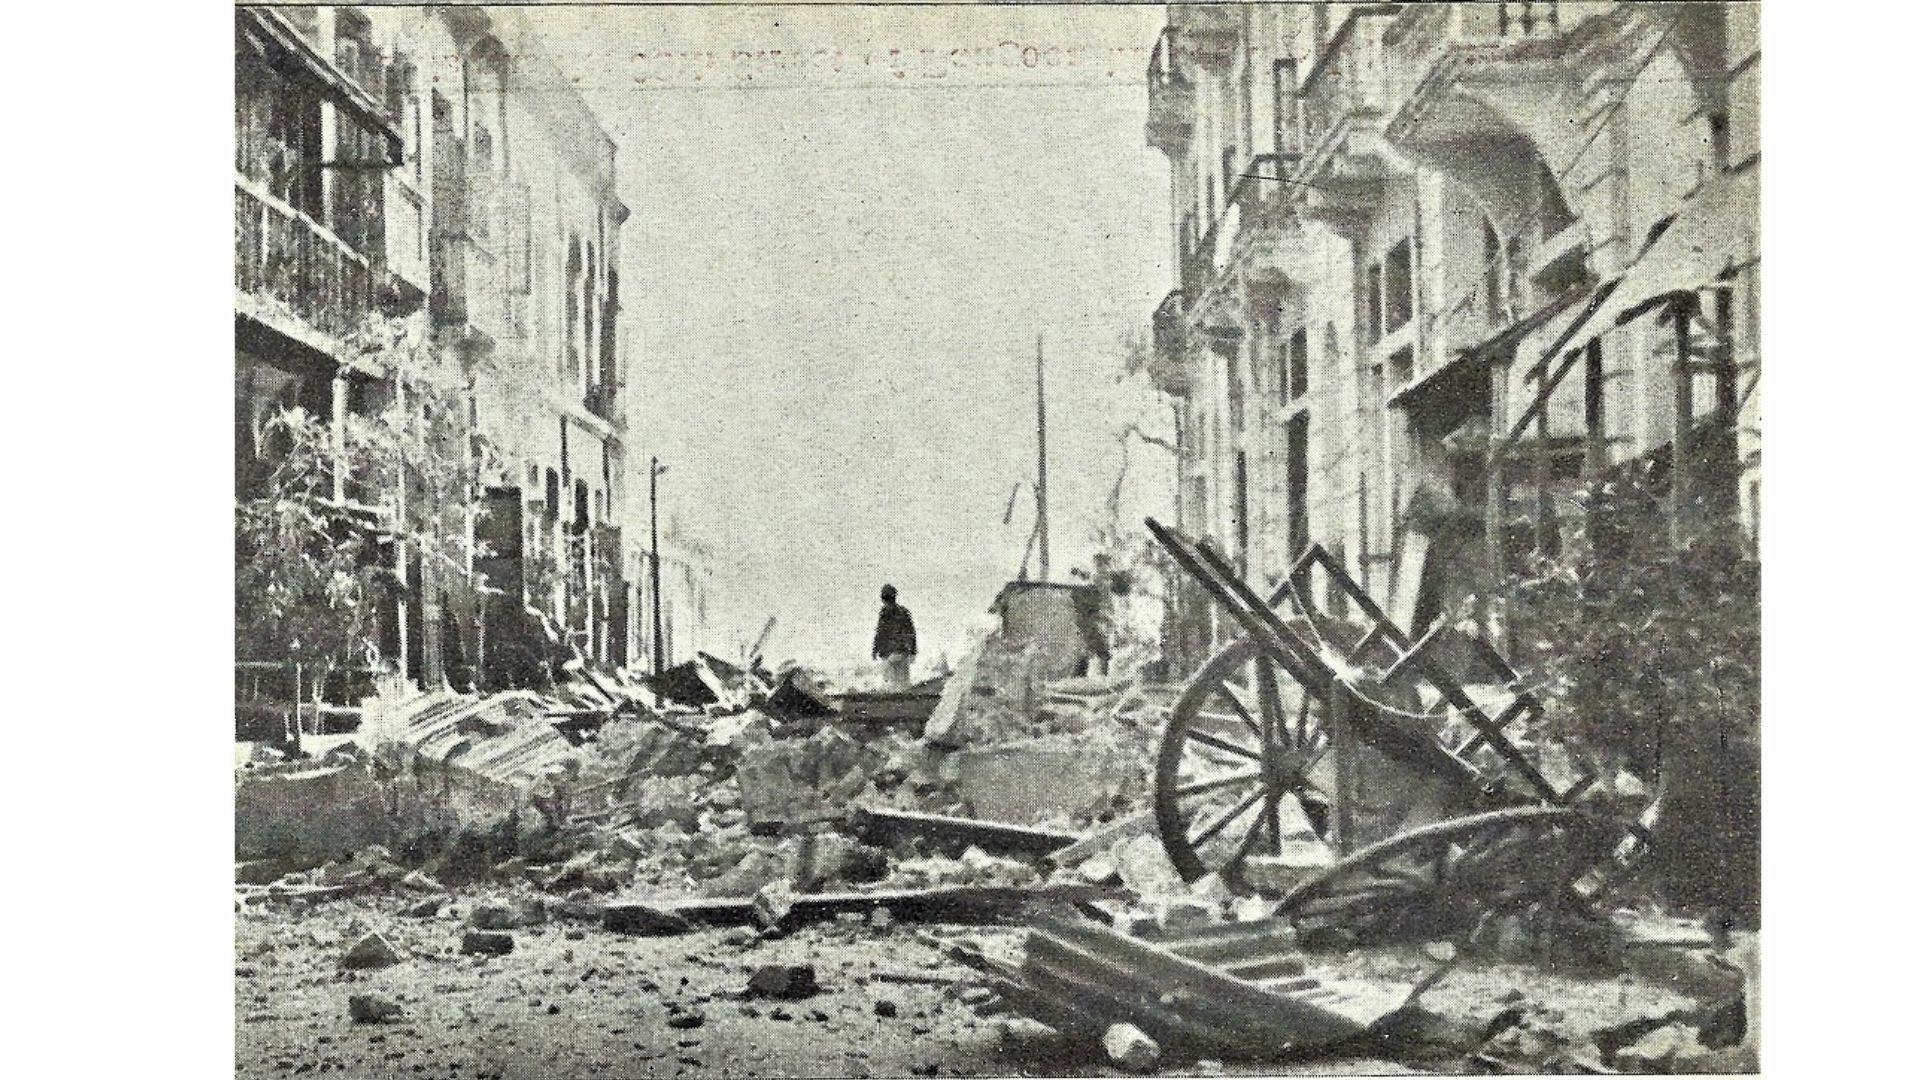 Rangoon, 39th Street after the Japanese Bombing of the city | Wikimedia Commons